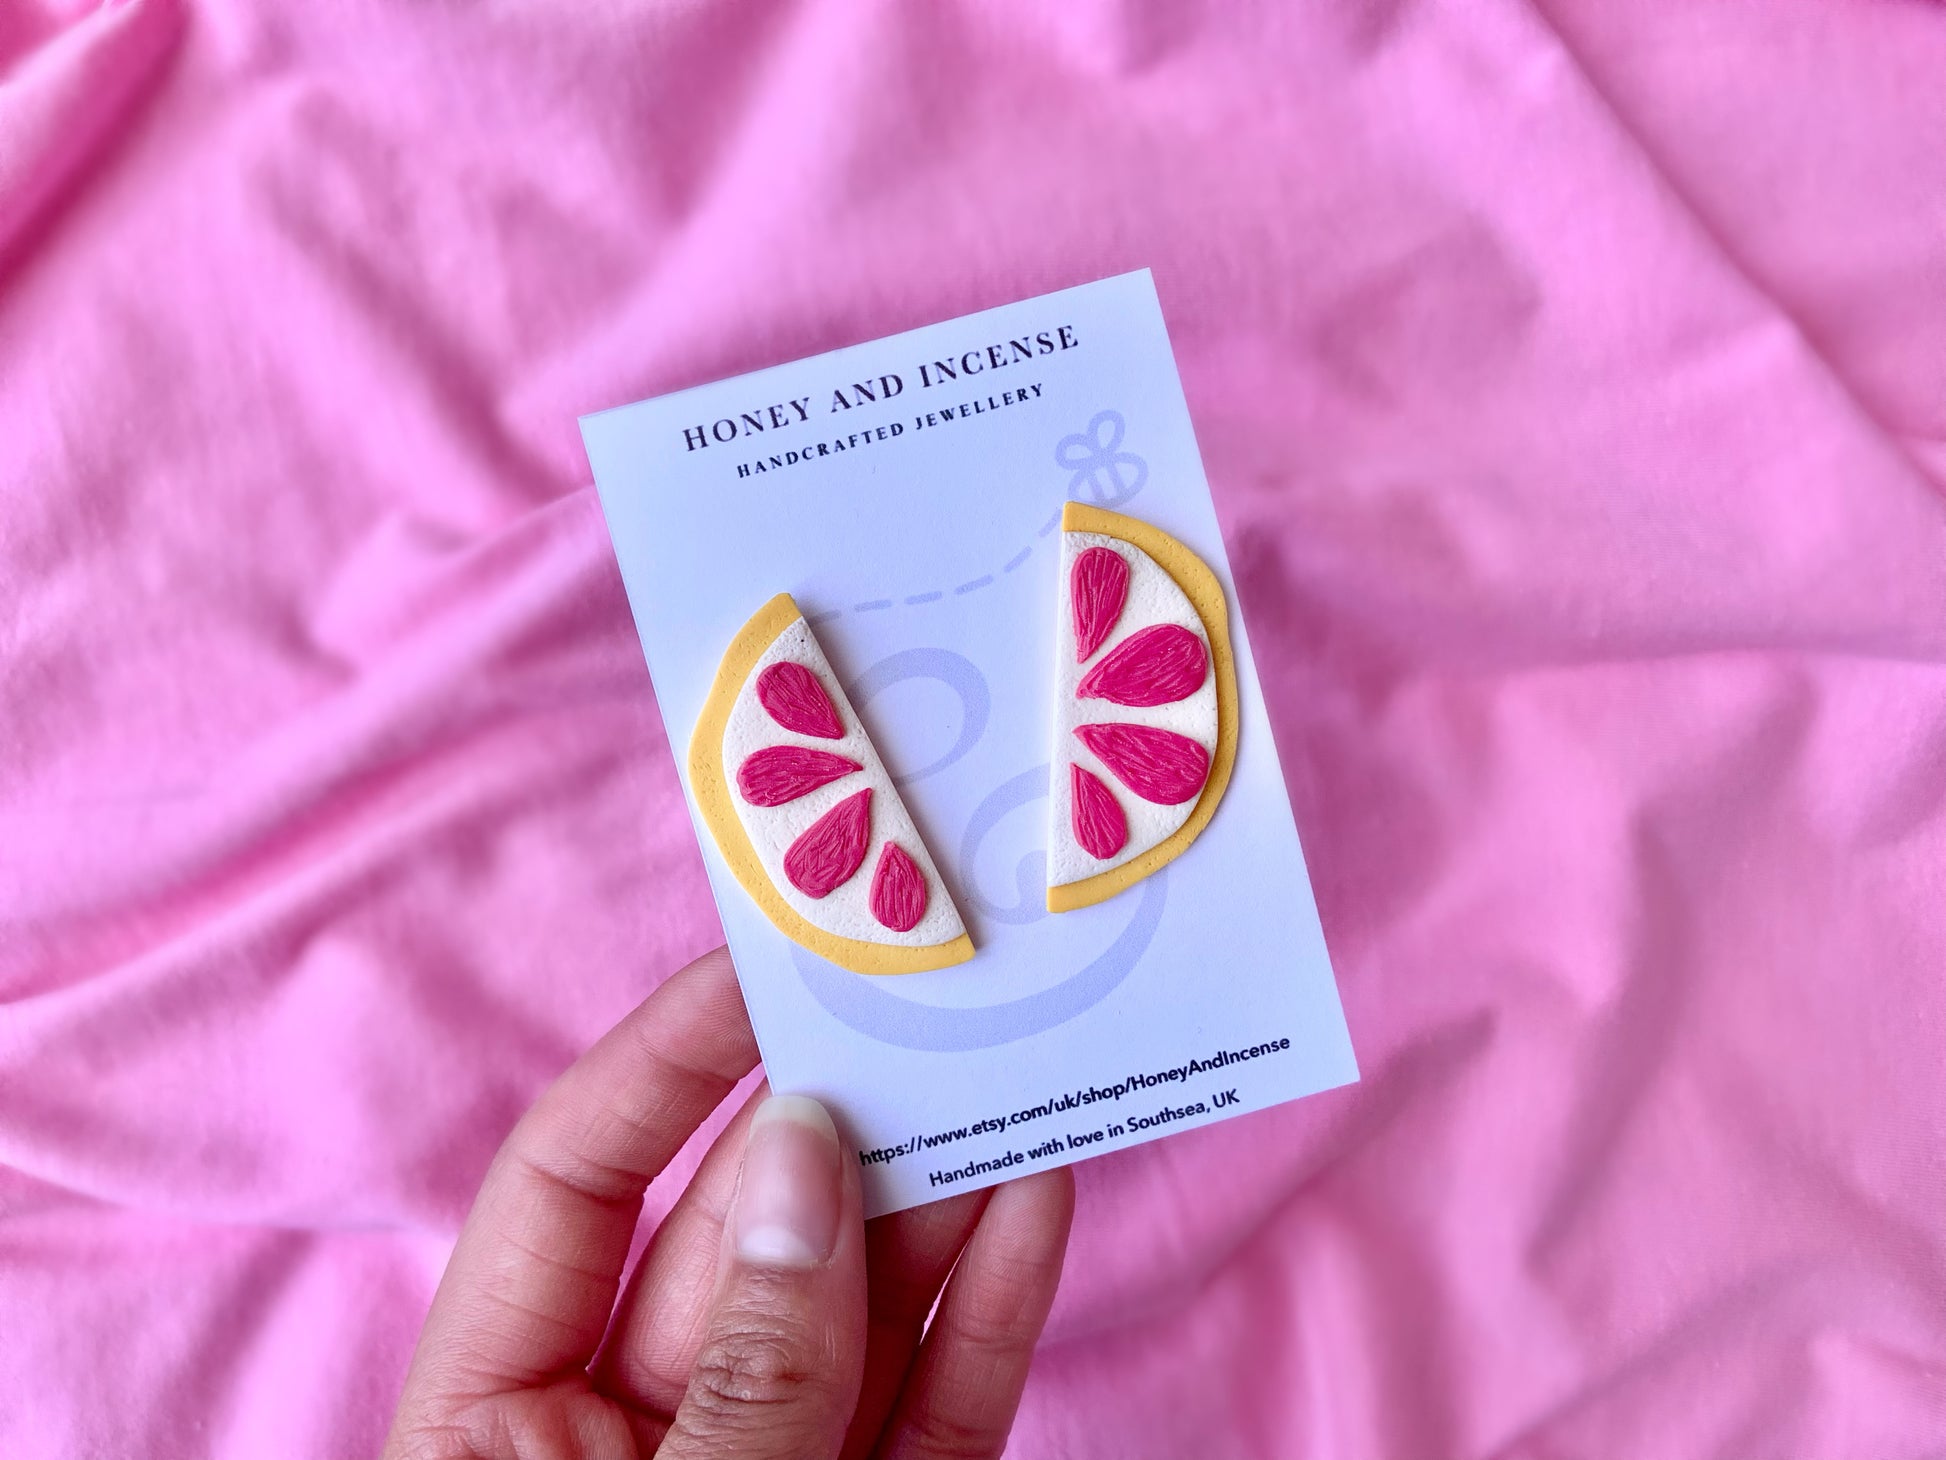 Pink grapefruit slice earrings, each earring is a slice which when put together makes a whole round slice. yellow edge with hot pink segemnts